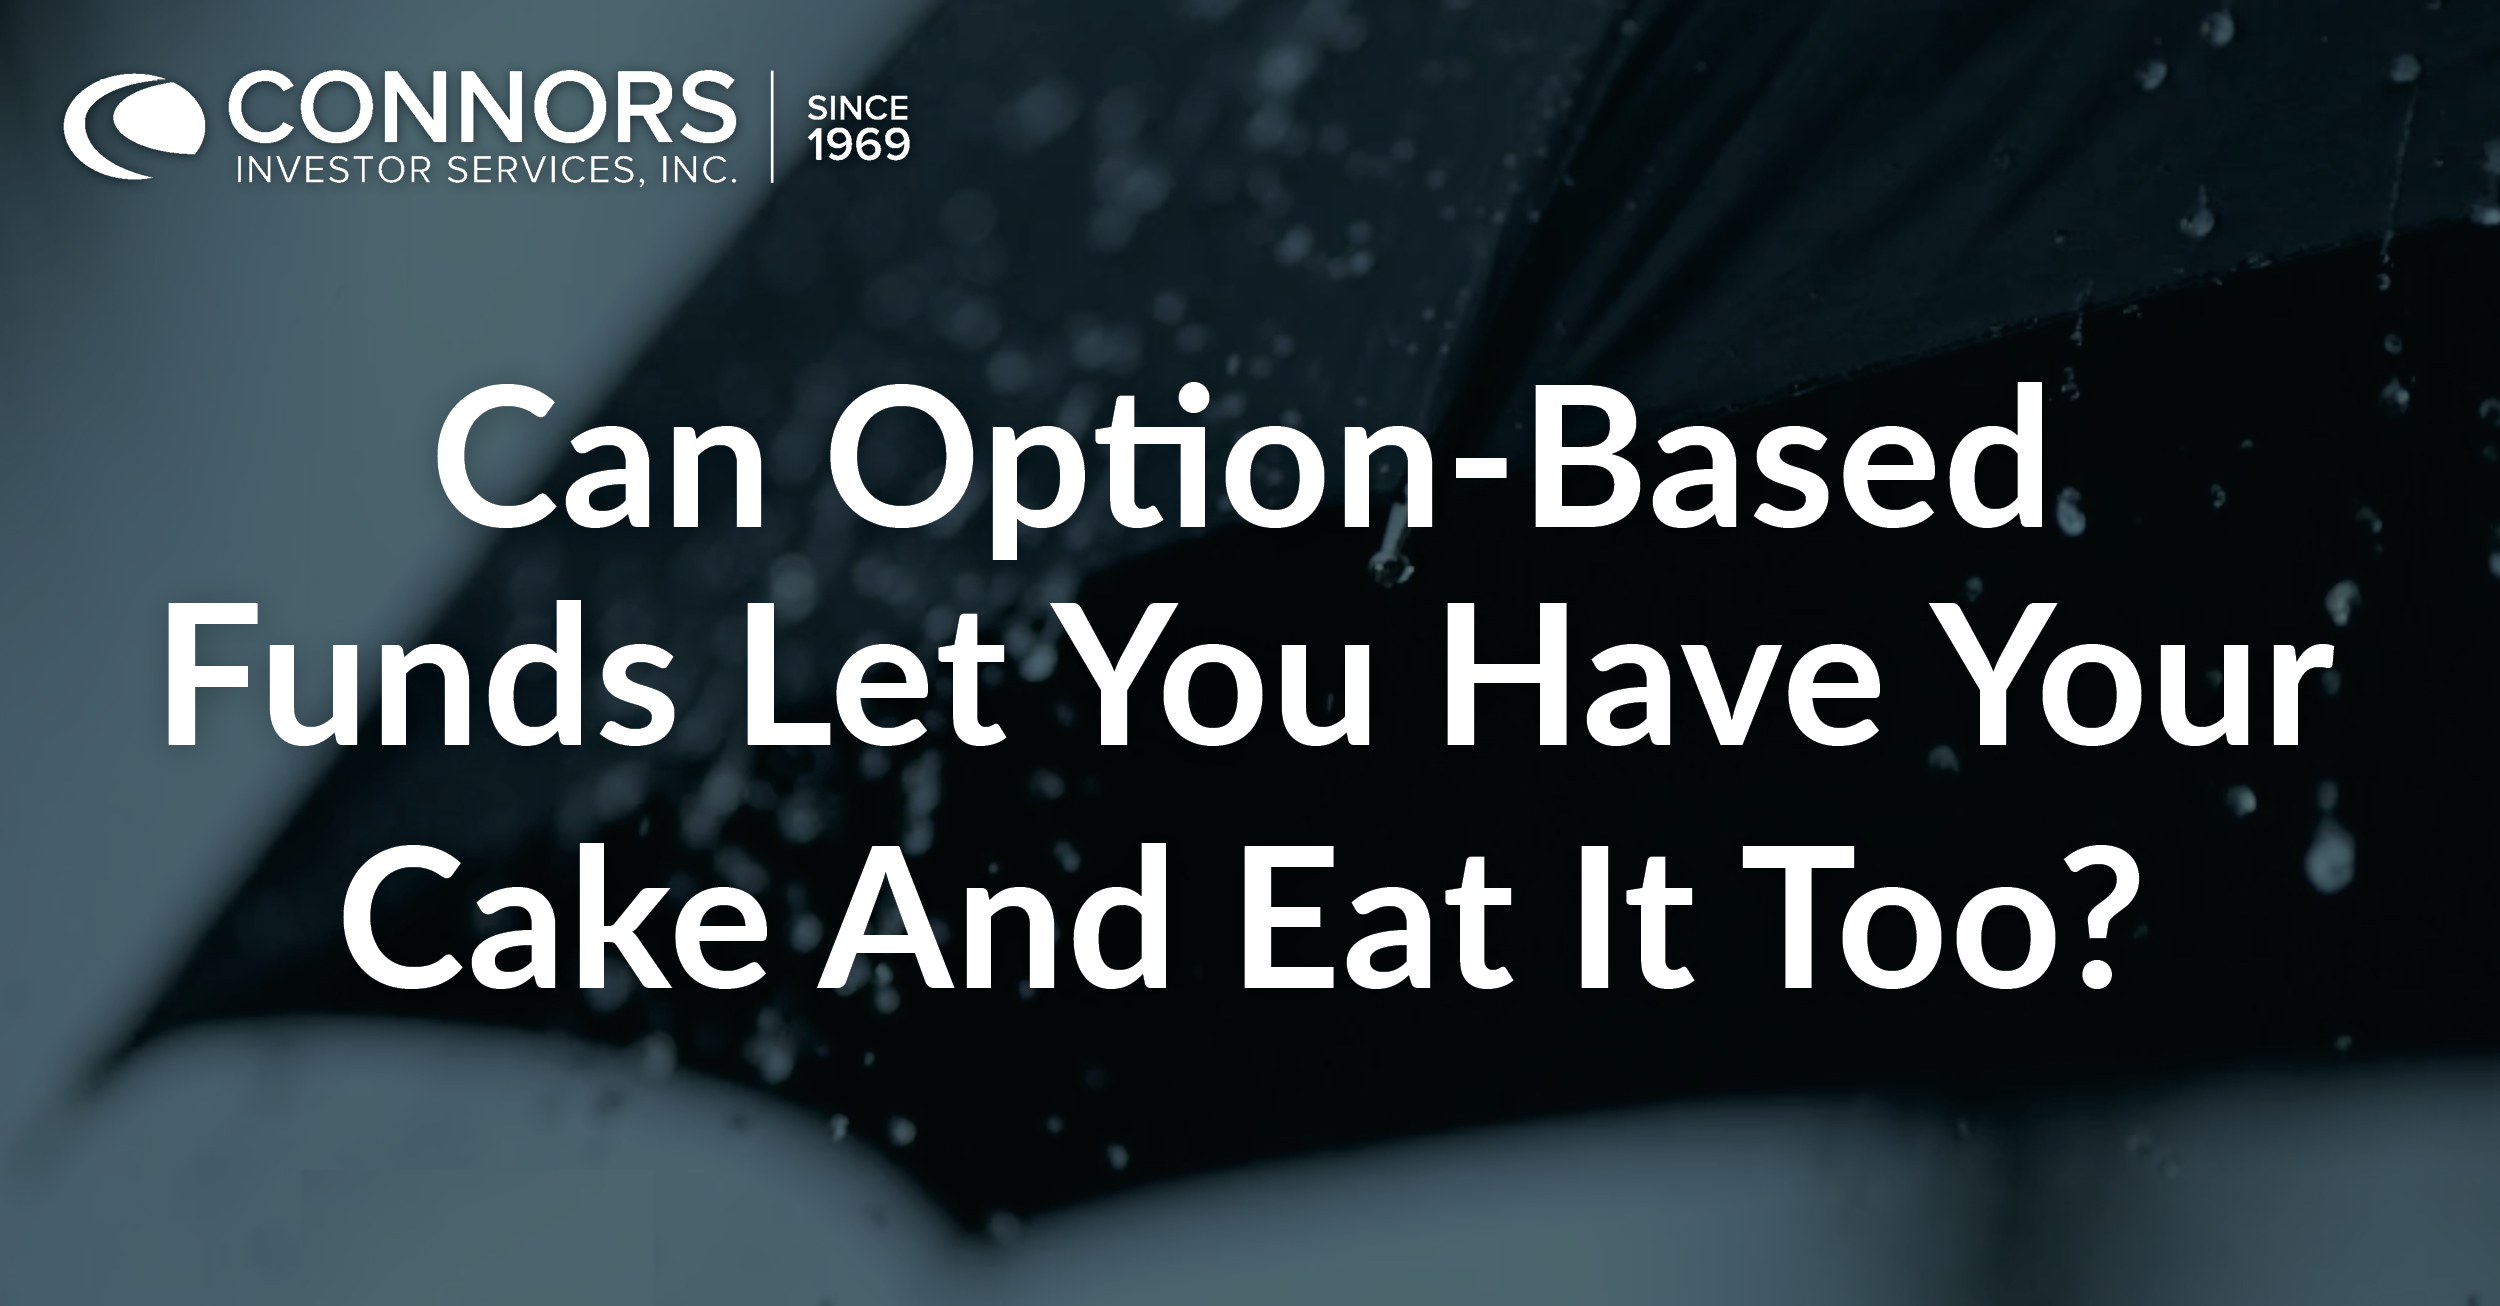 Can Option-Based Funds Let You Have Your Cake And Eat It Too?